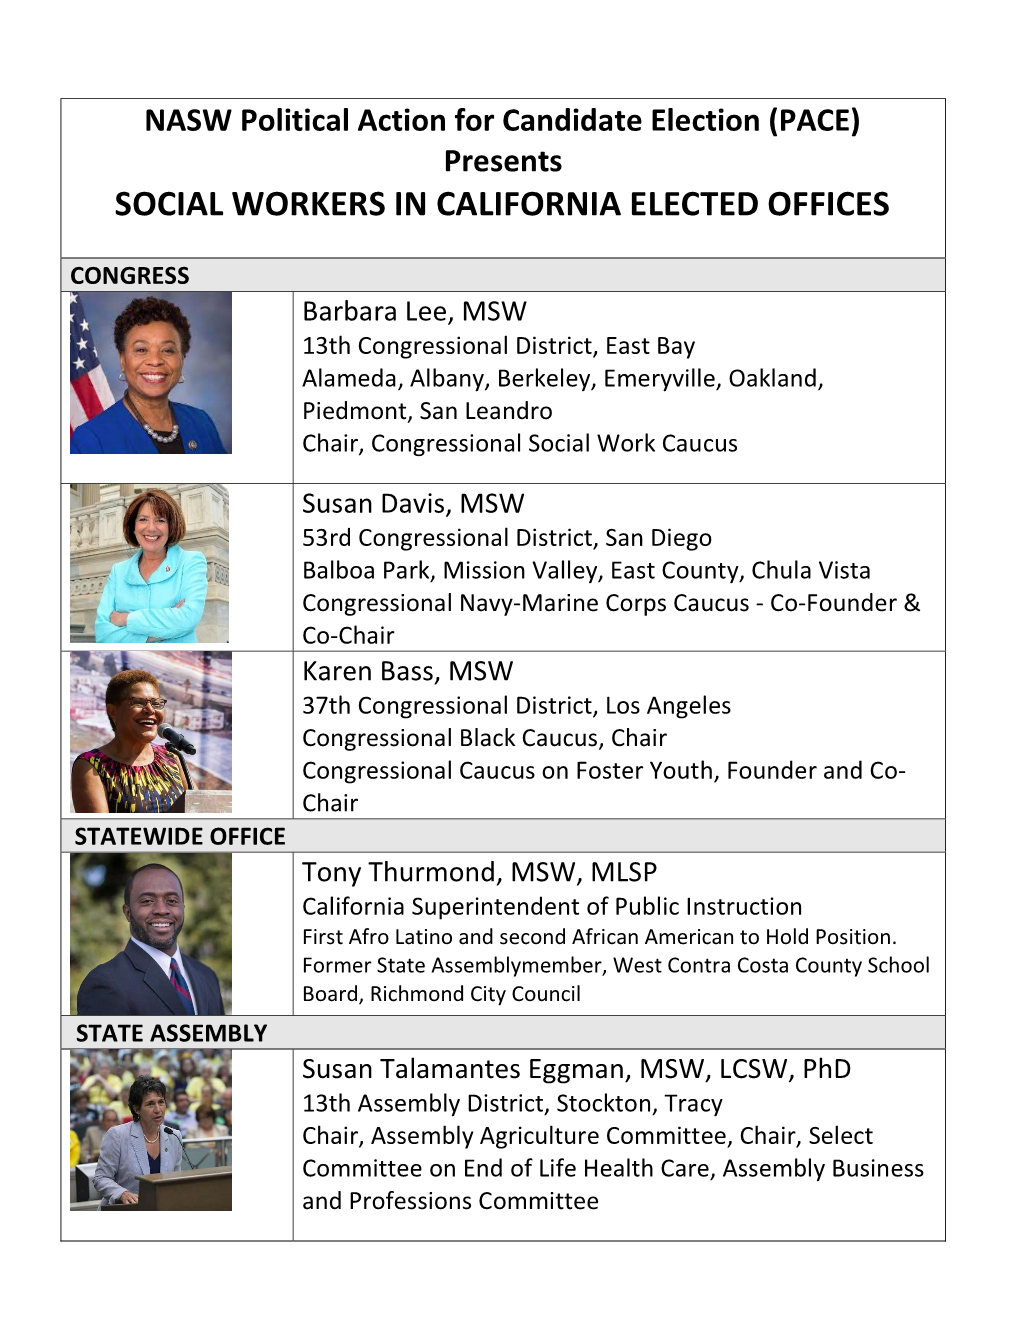 Social Workers in California Elected Offices